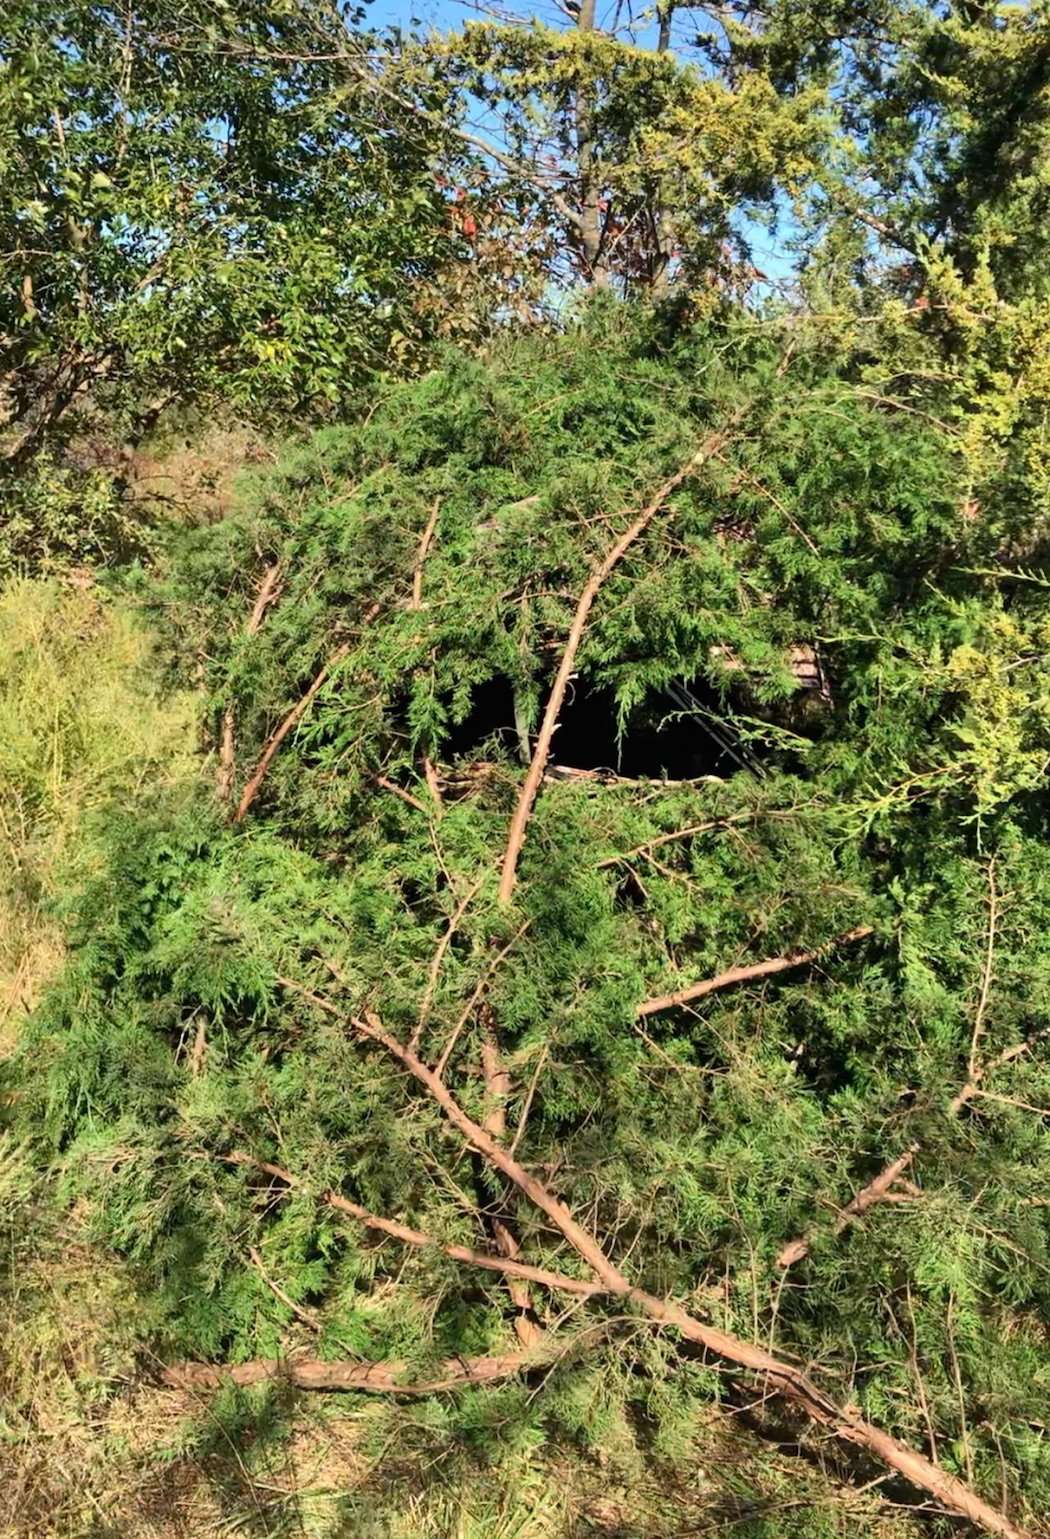 A ground blind was Burton's only hope to hunt the area, so he took his time to engulf it with cedar boughs, which made it virtually disappear. (Photo courtesy of Scott Burton)